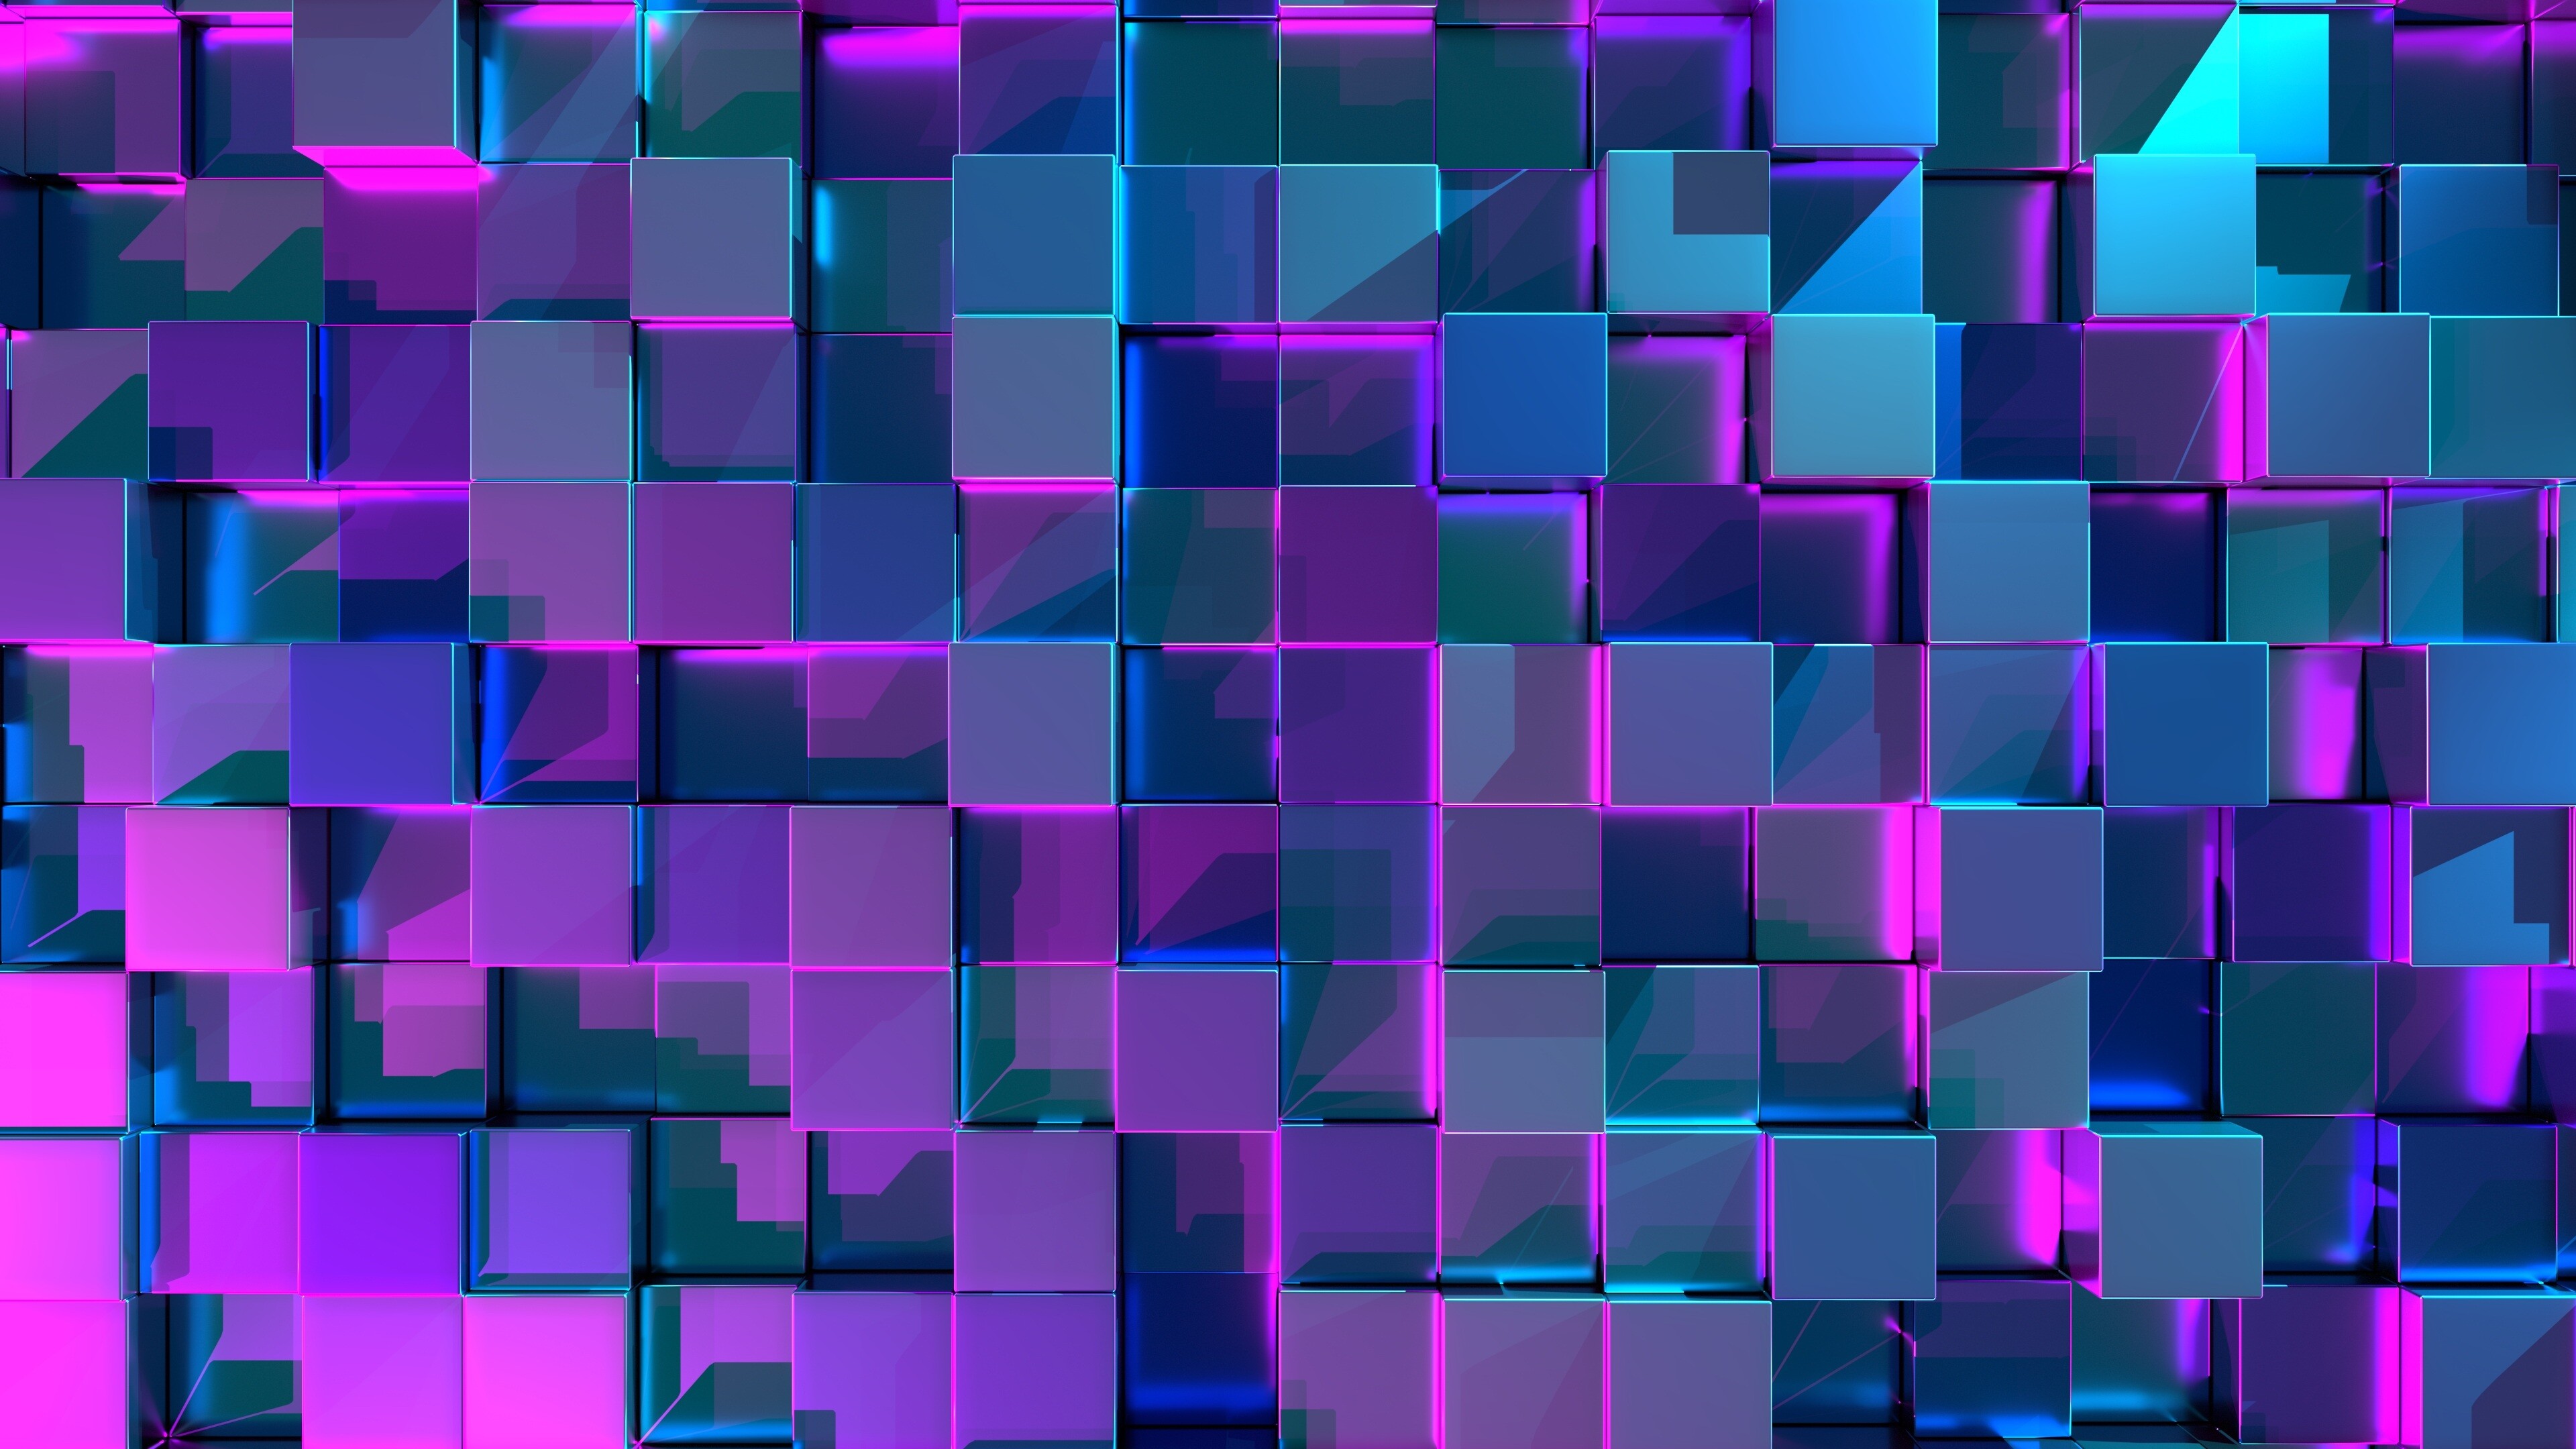 Geometric Abstract: Neon cubes, Parallel lines, Right angles, Squares. 3840x2160 4K Background.